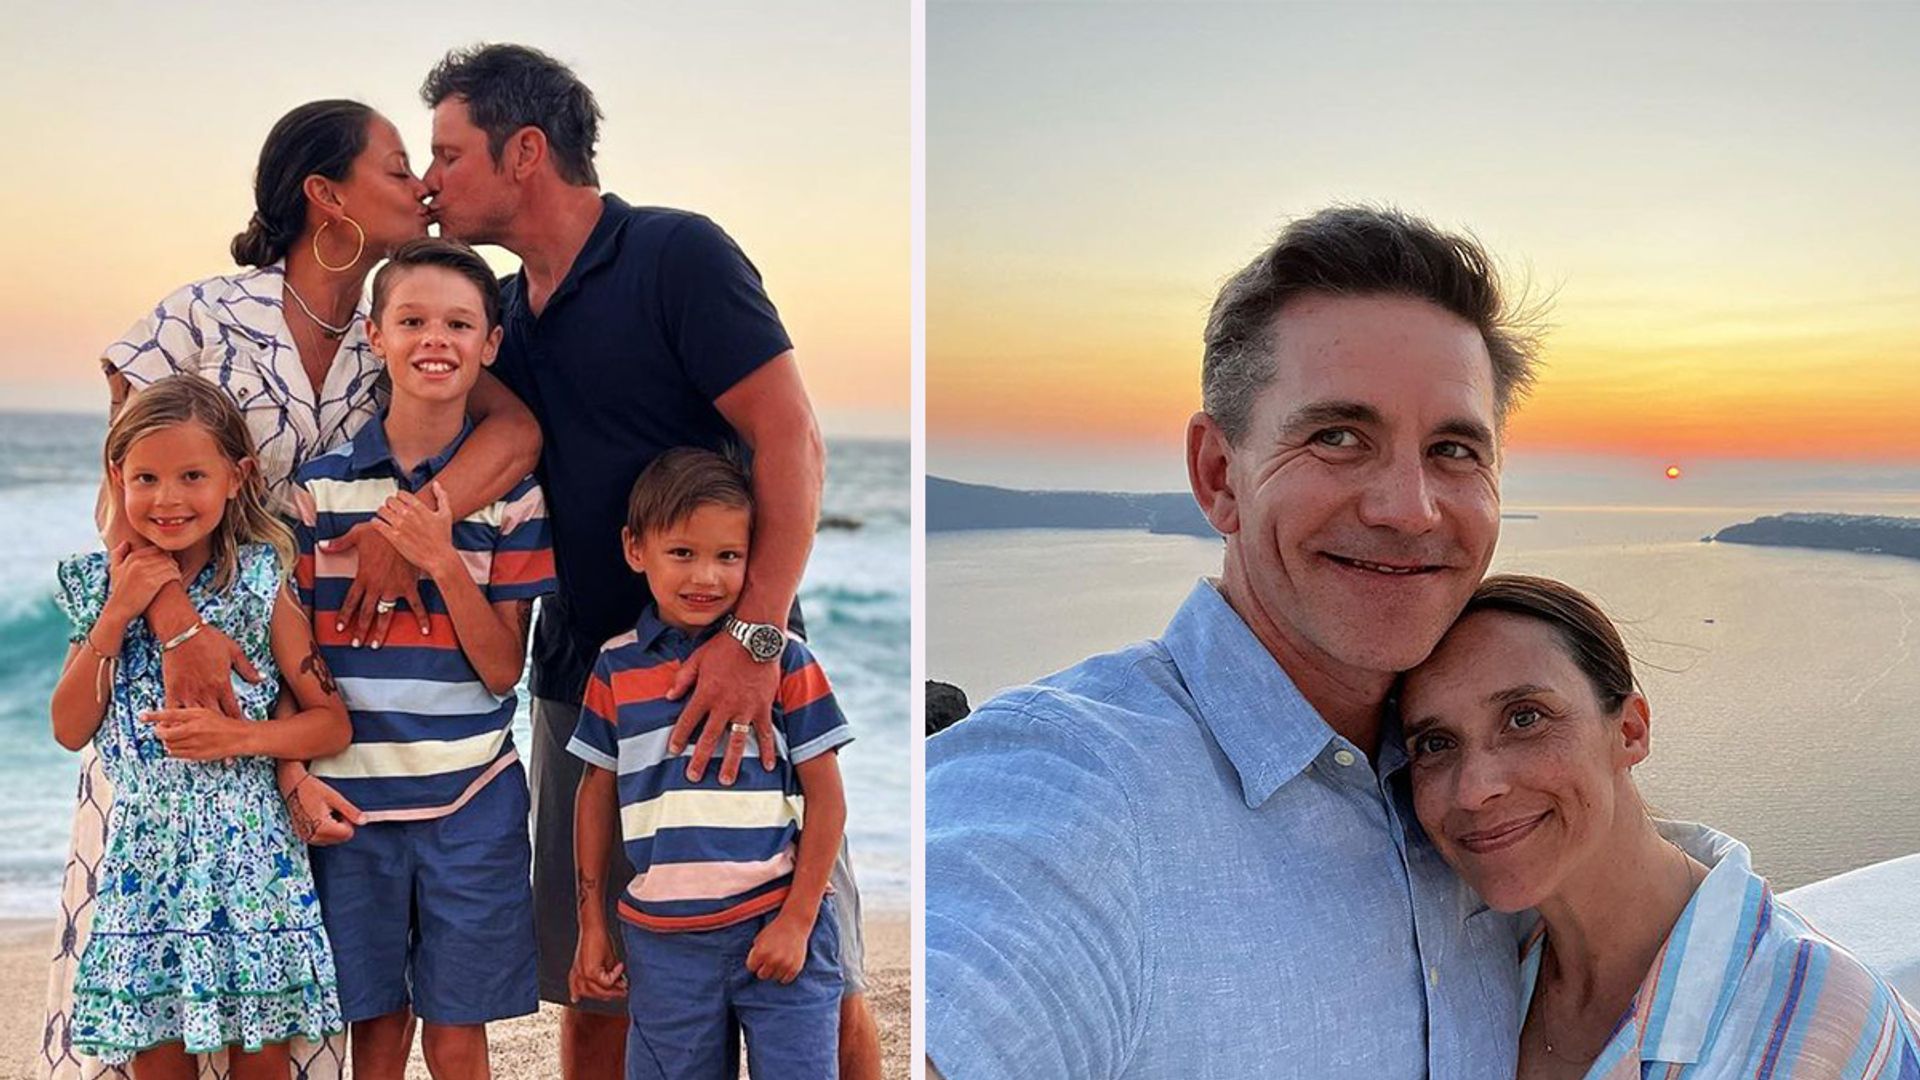 Vanessa Lachey and family, Brian Dietzen and wife, split image 